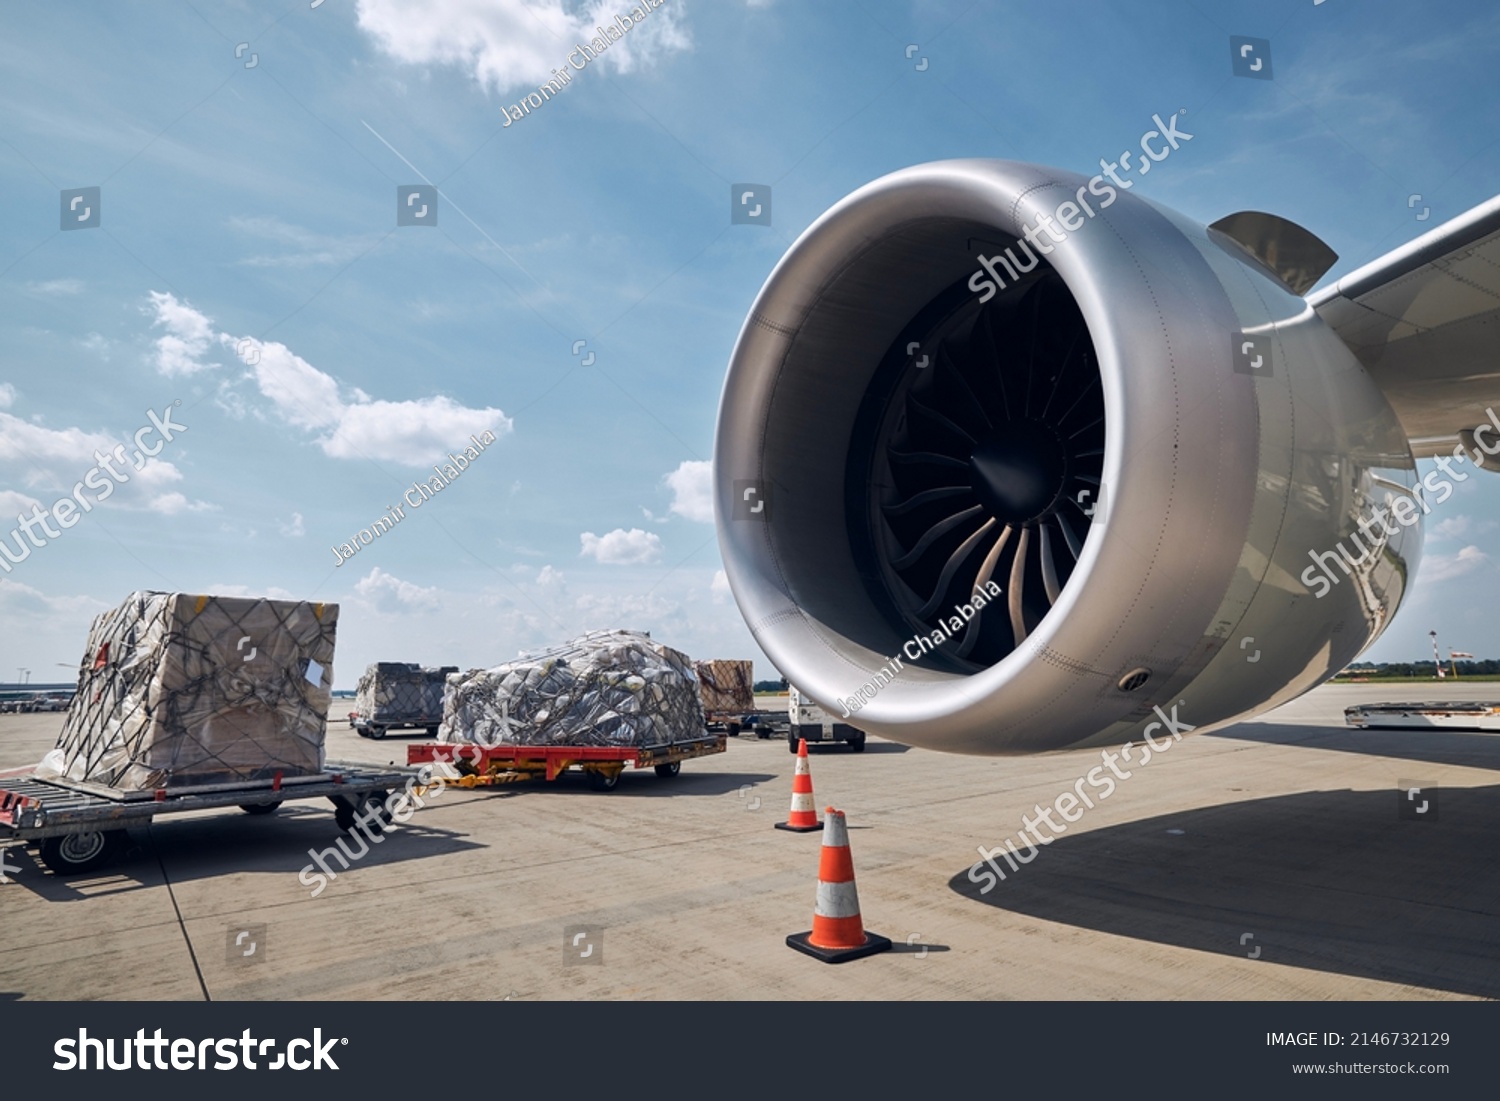 Preparation freight airplane at airport. Loading of cargo containers against jet engine of plane. #2146732129